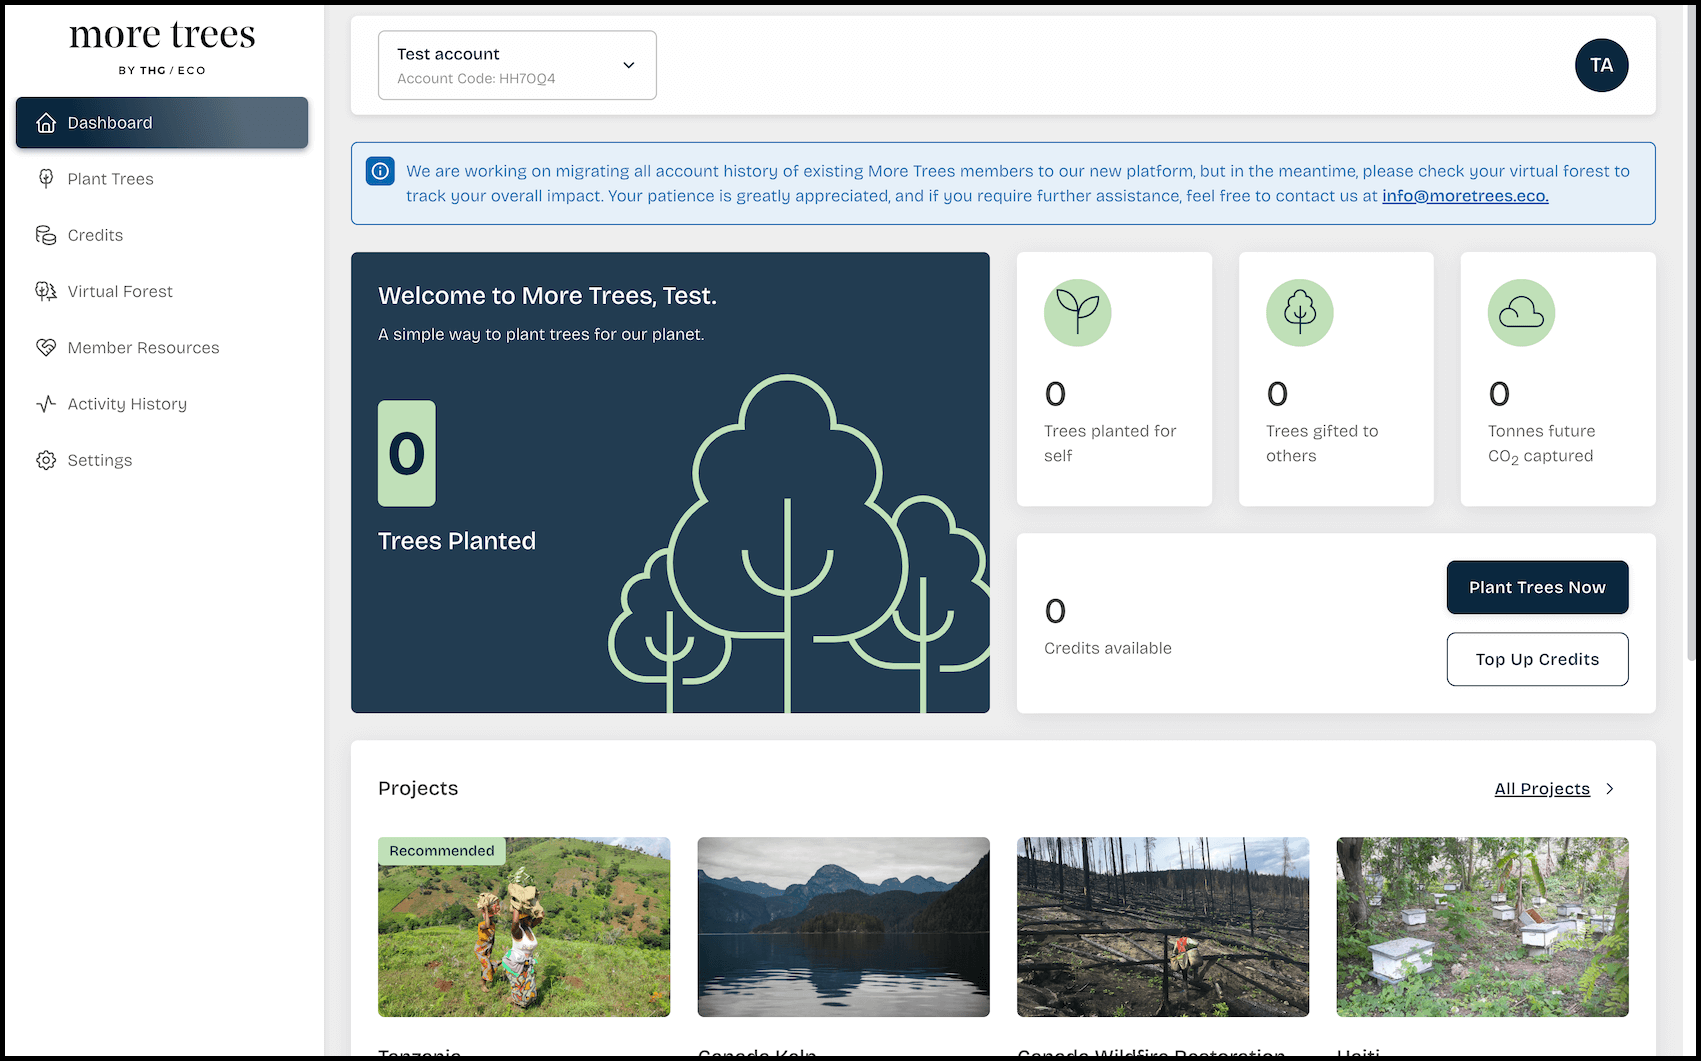 Dashboard of More Trees user showing various statistics